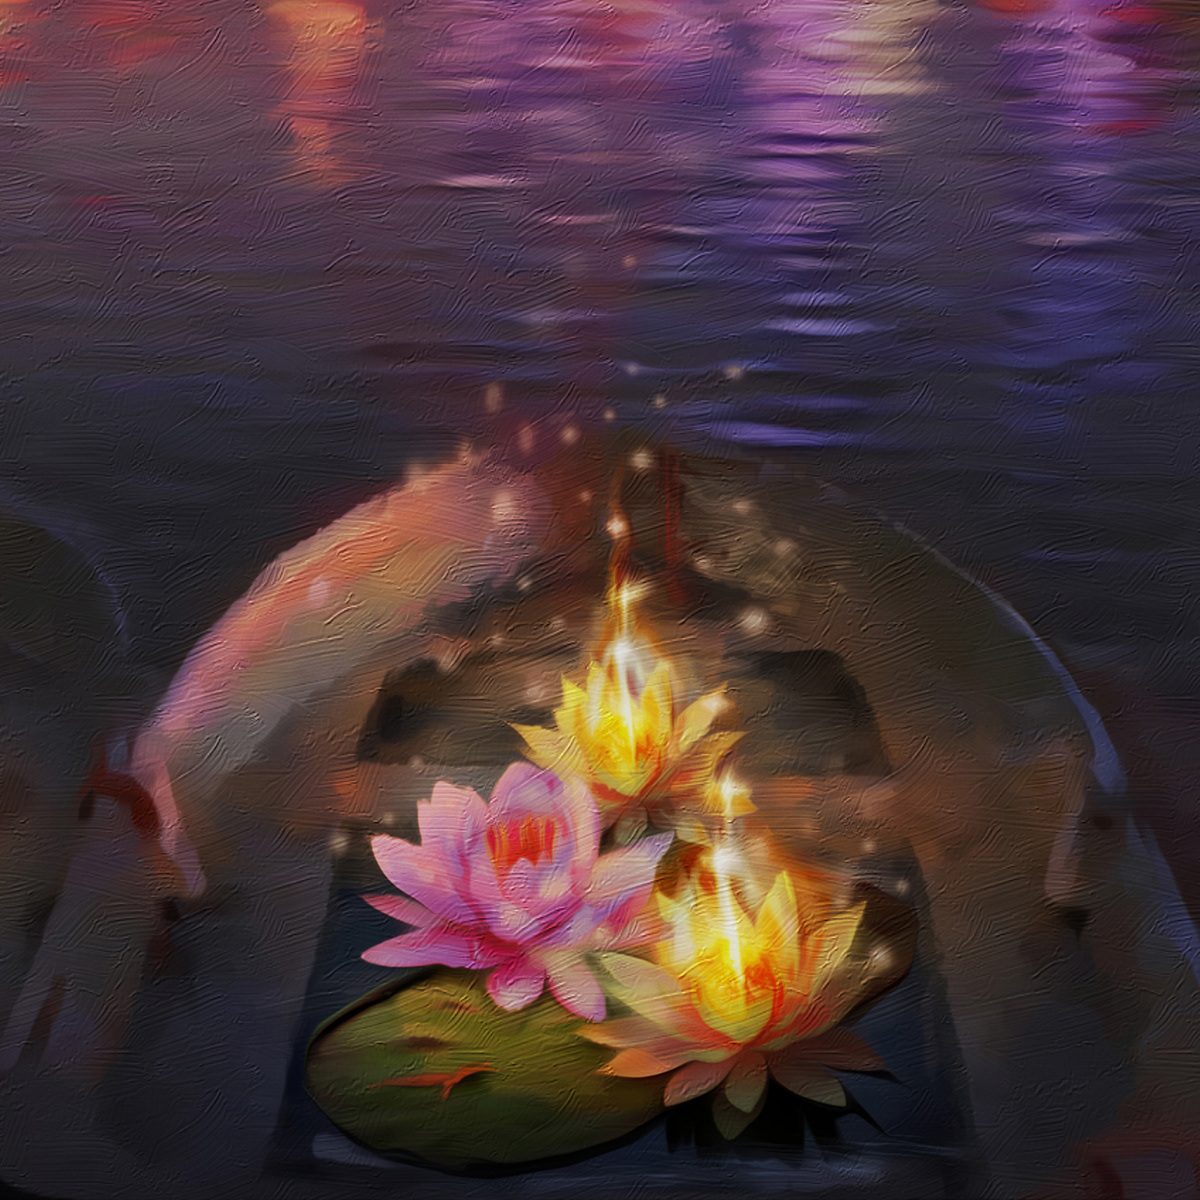 Digital Art  fairy lilies flaming lilies magic moon Night landscape night lights reflections in the water sinking boats surreal theatrical scenery